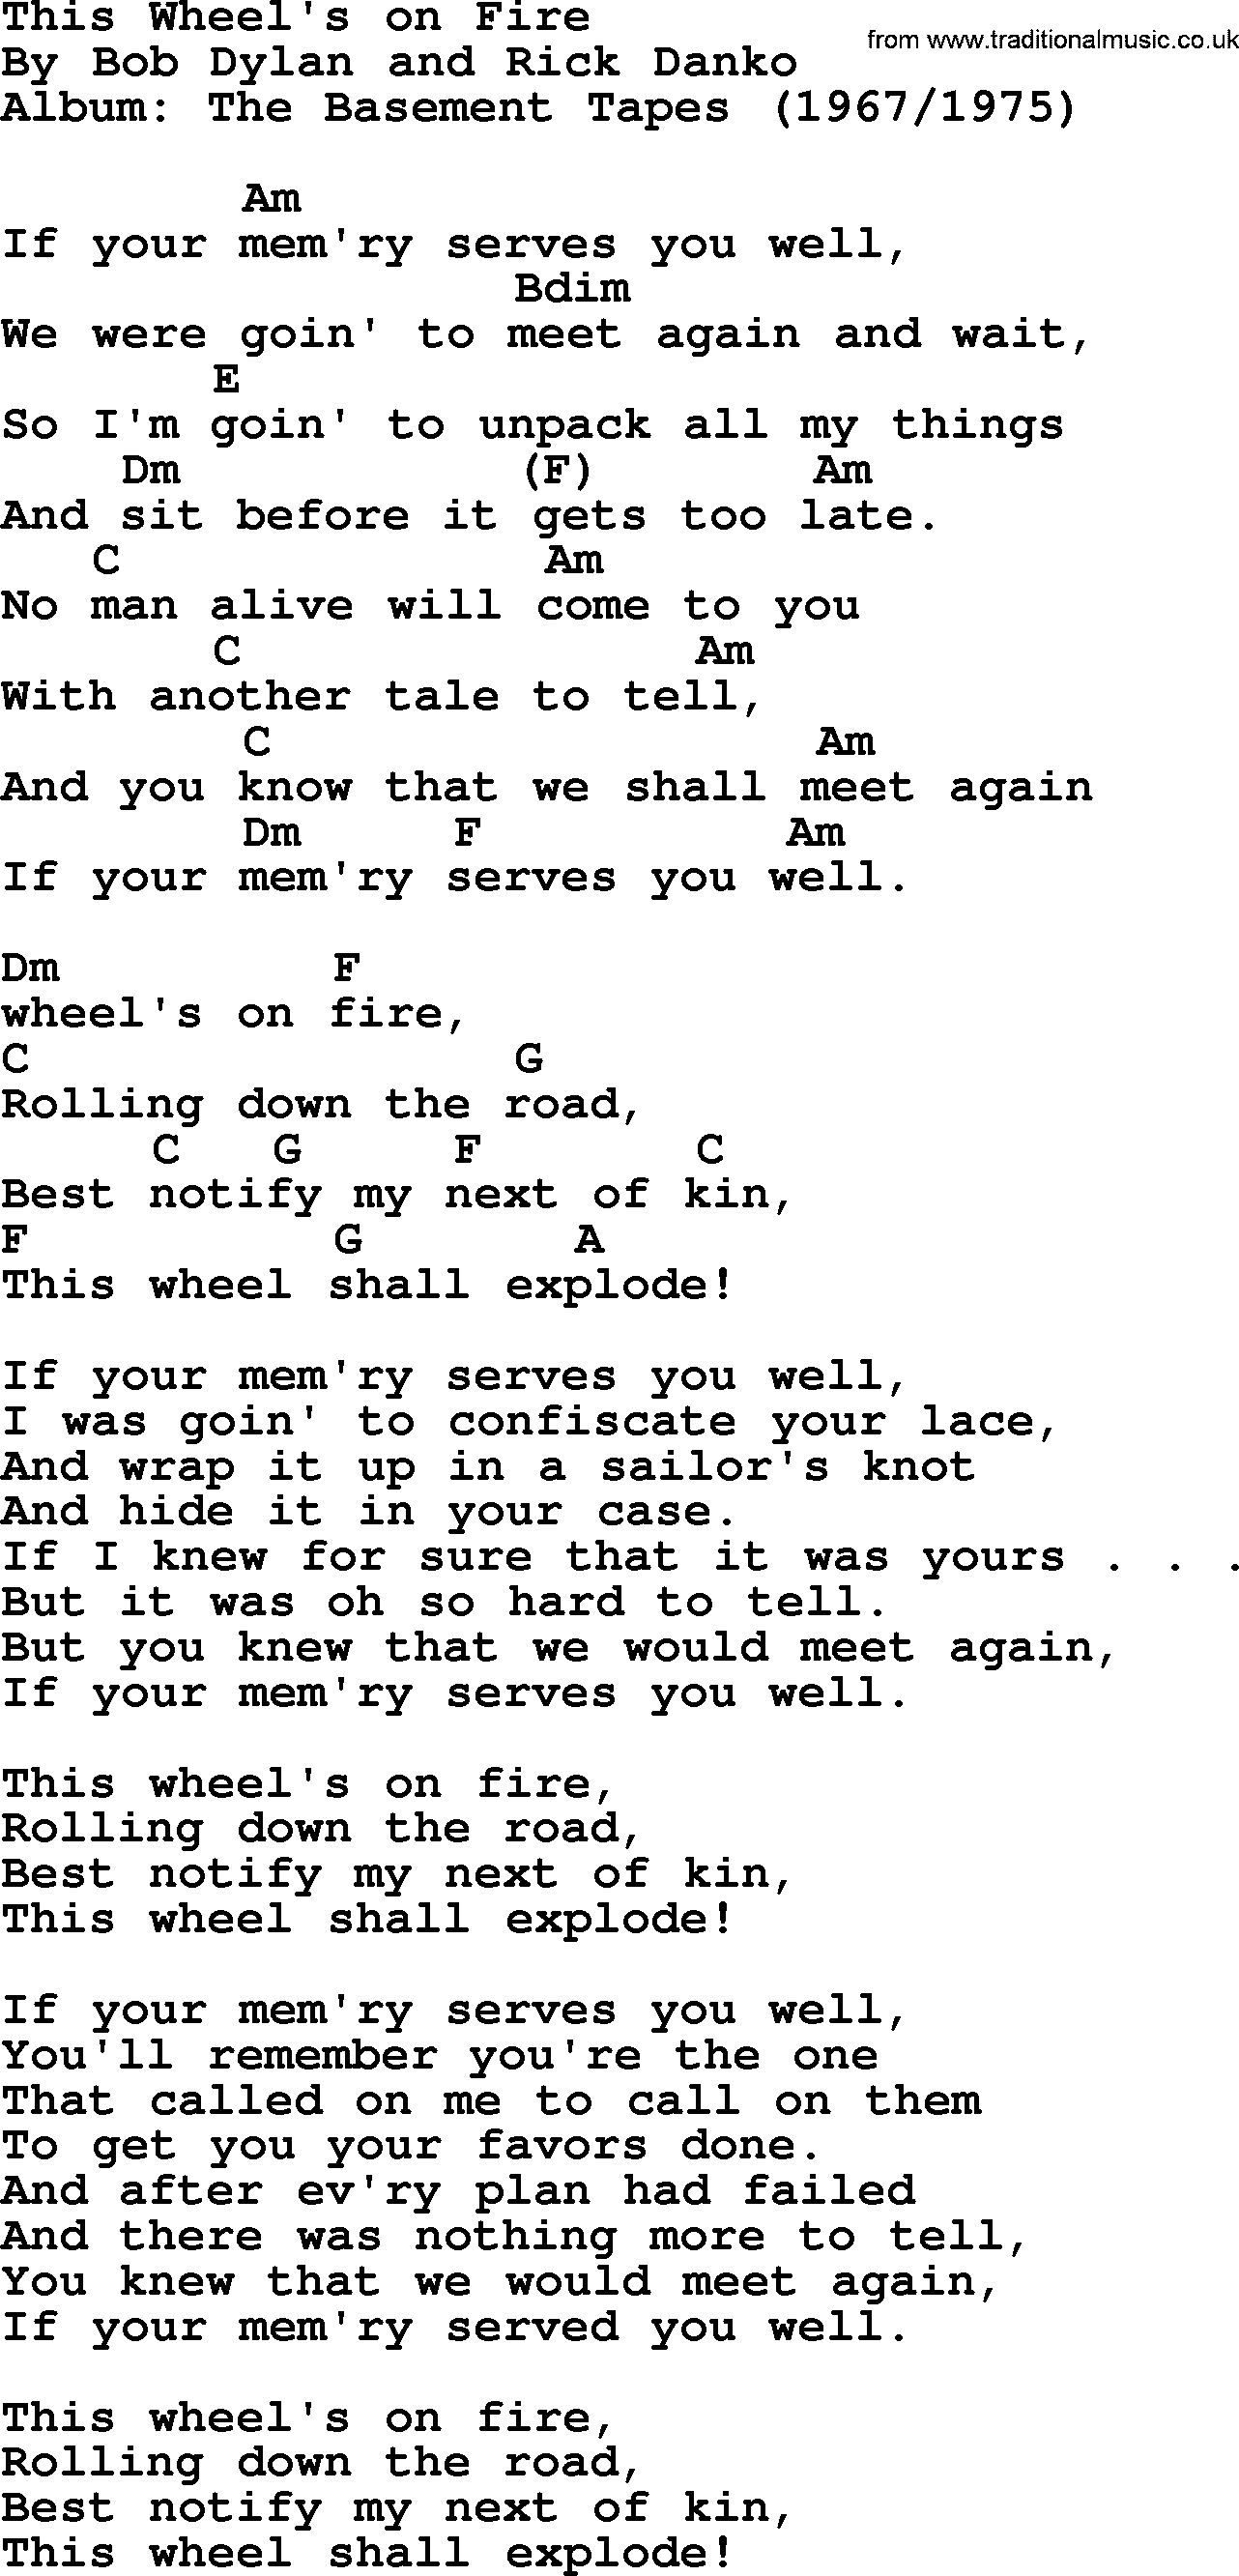 Bob Dylan song, lyrics with chords - This Wheel's on Fire